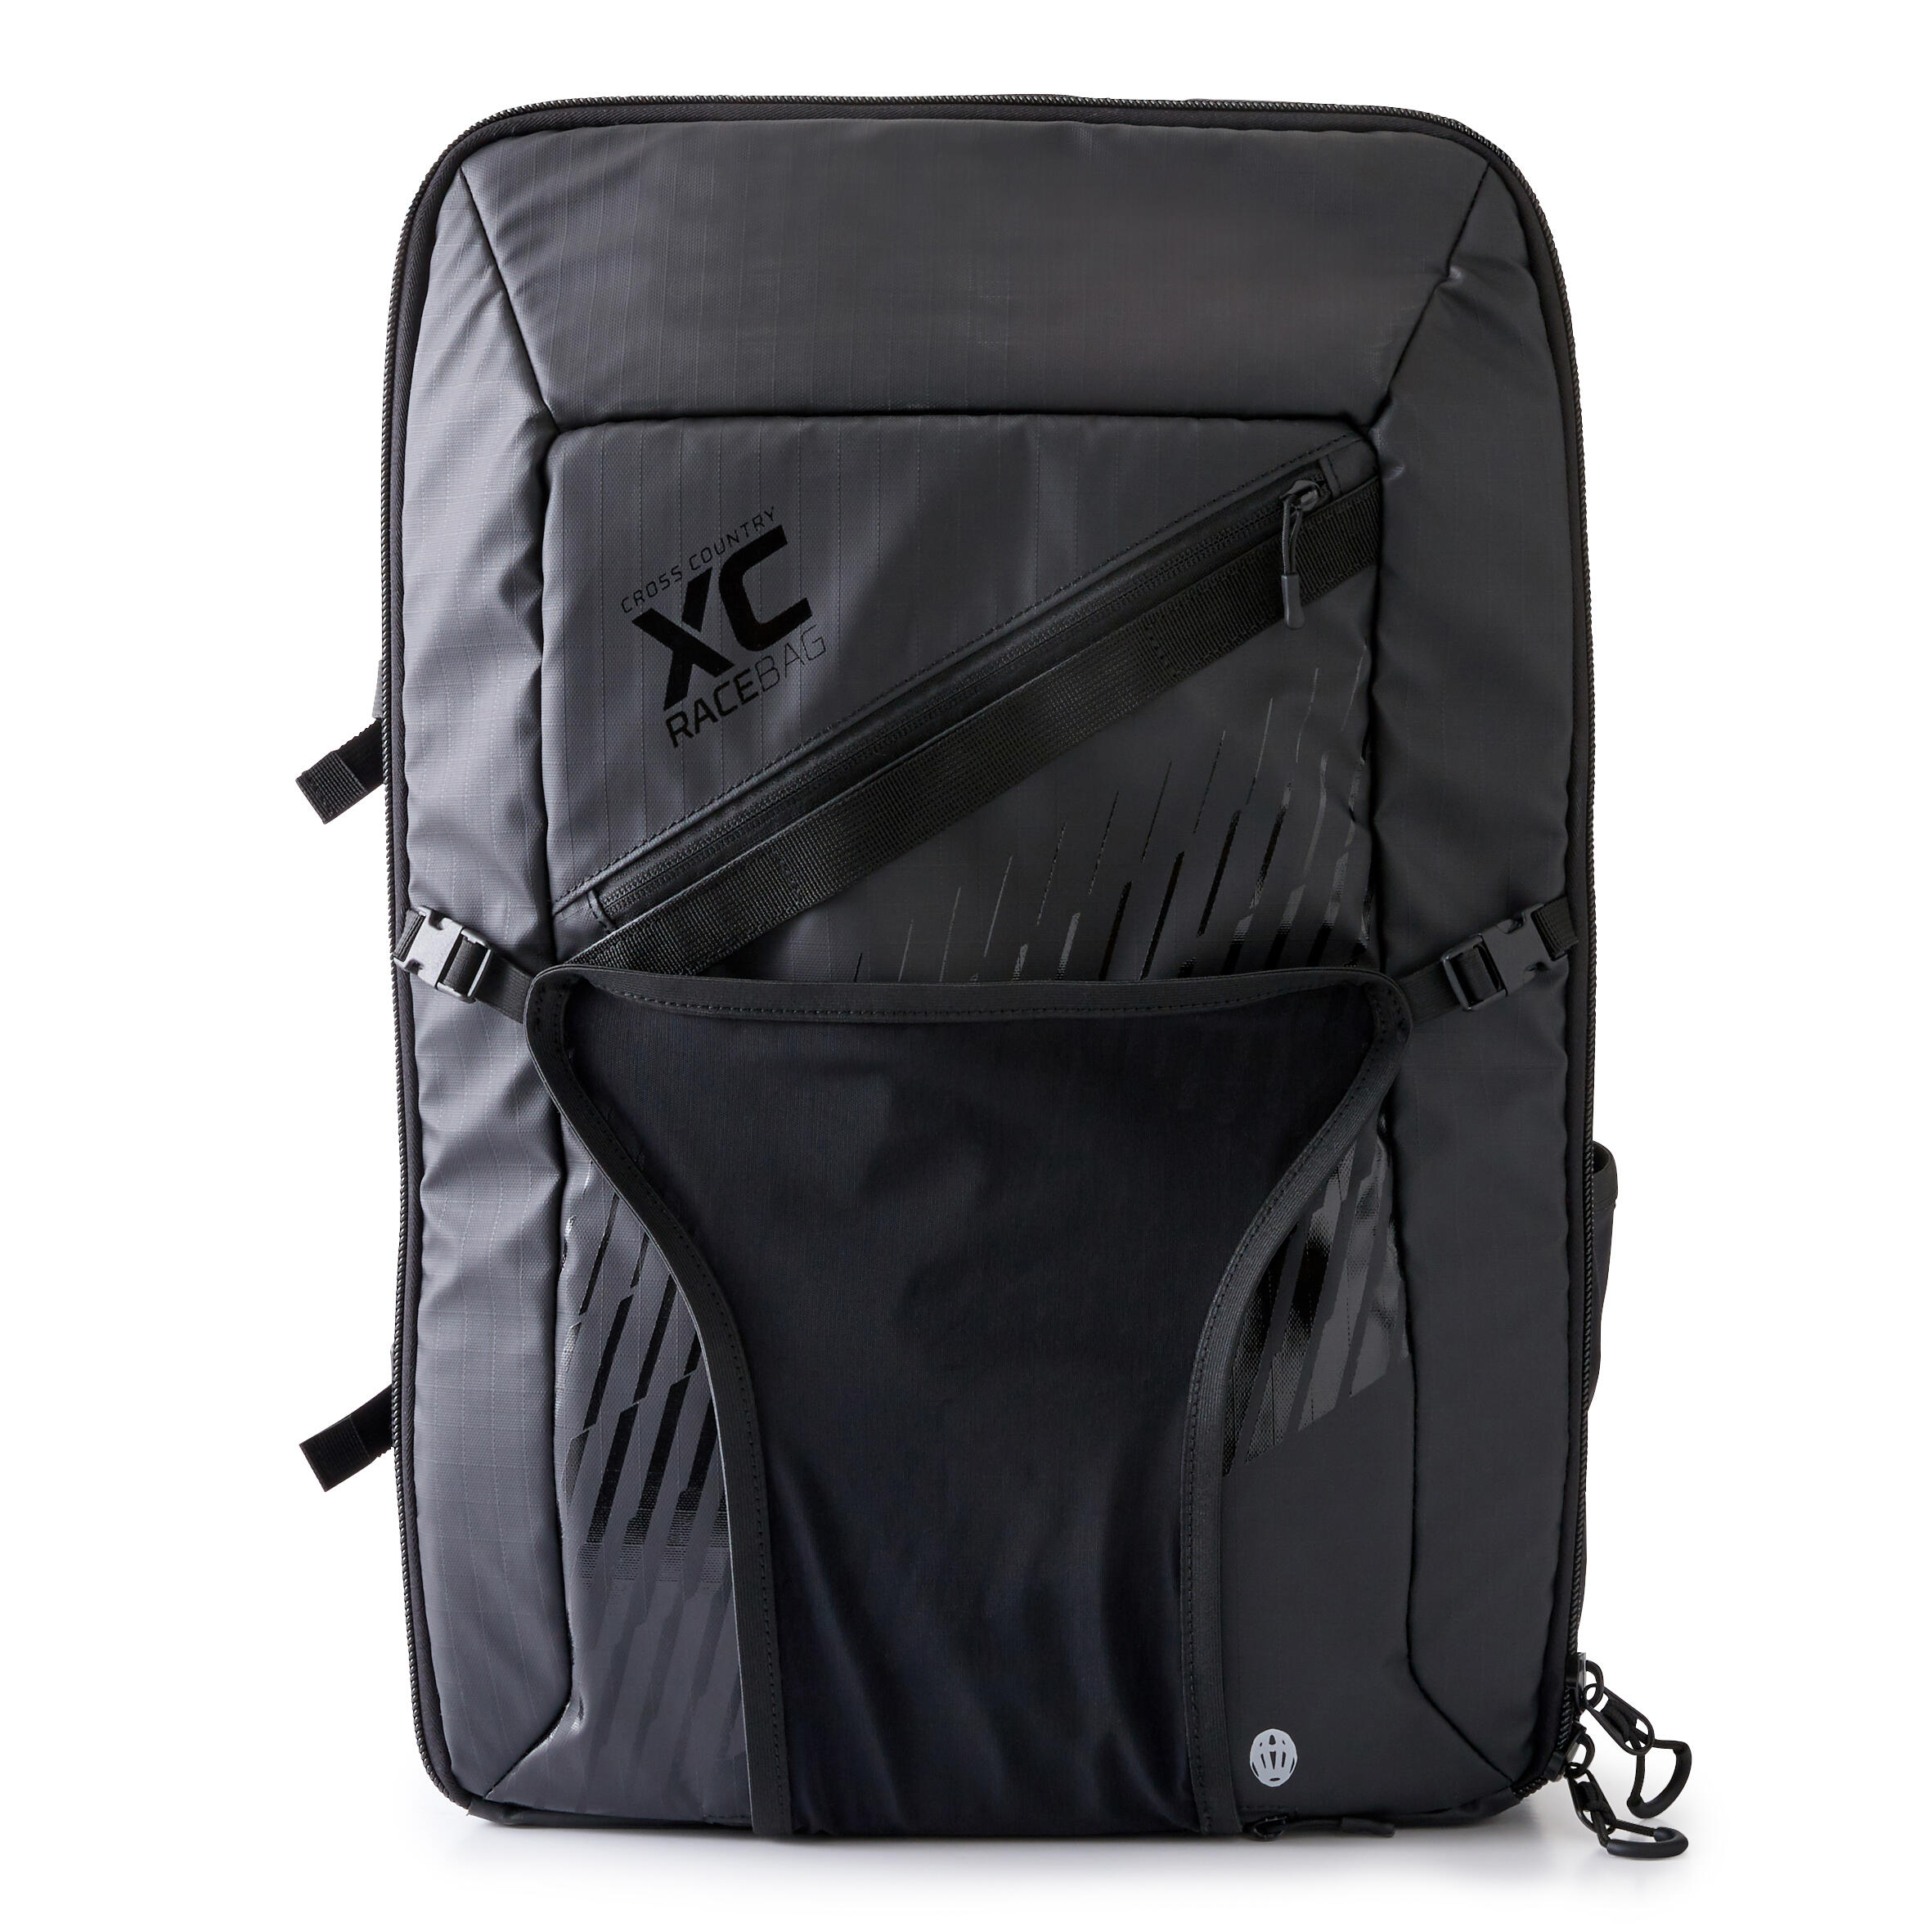 Cycling Backpacks and Messenger Bags